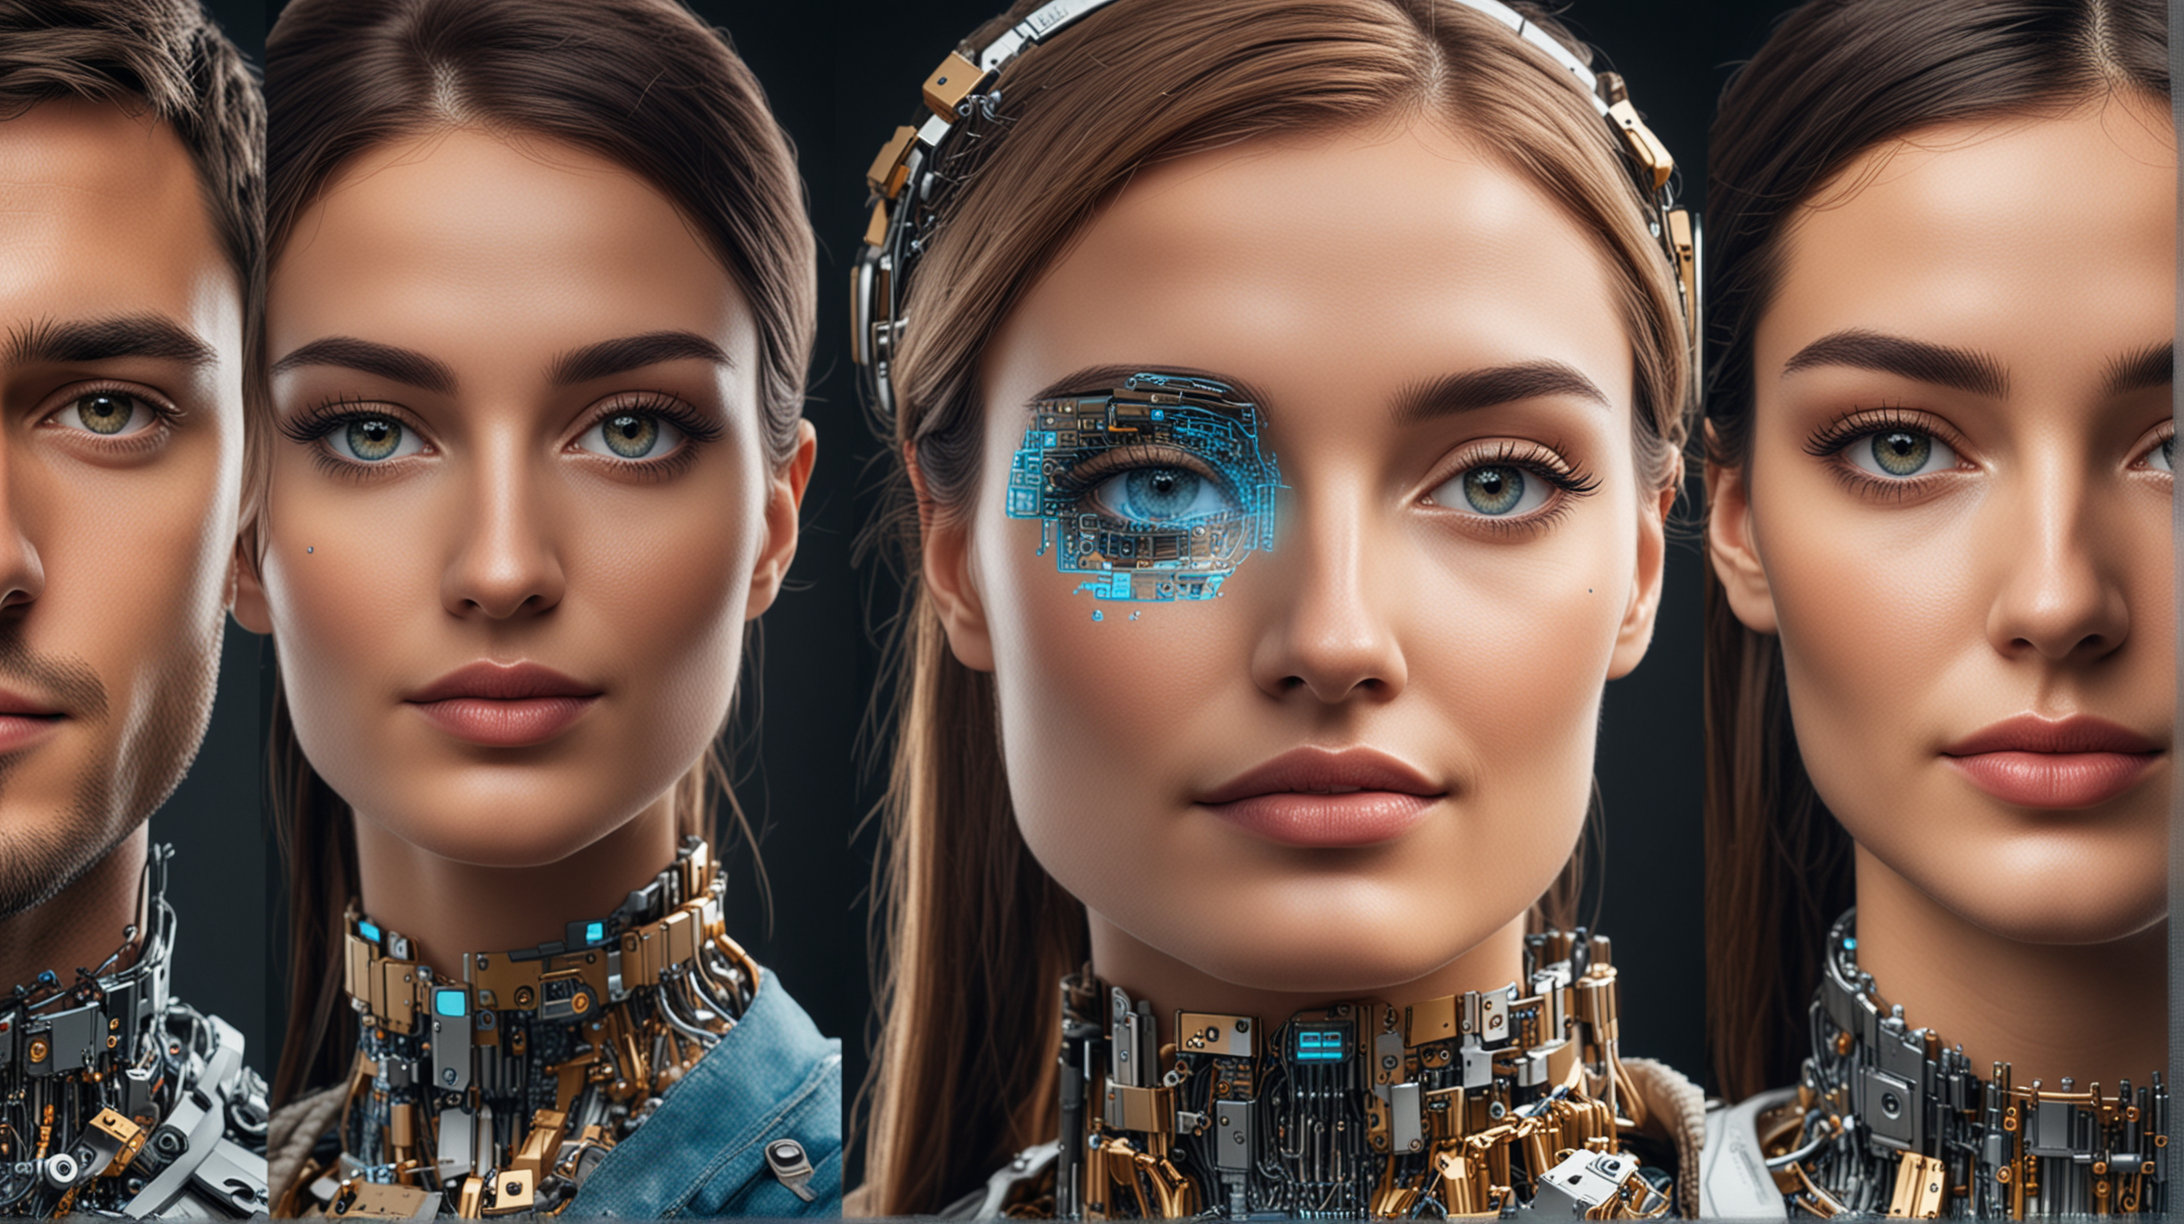 arteficial intelligence conquering computer vision chatbots, digital analysis, automation, machine learning, face recognitions